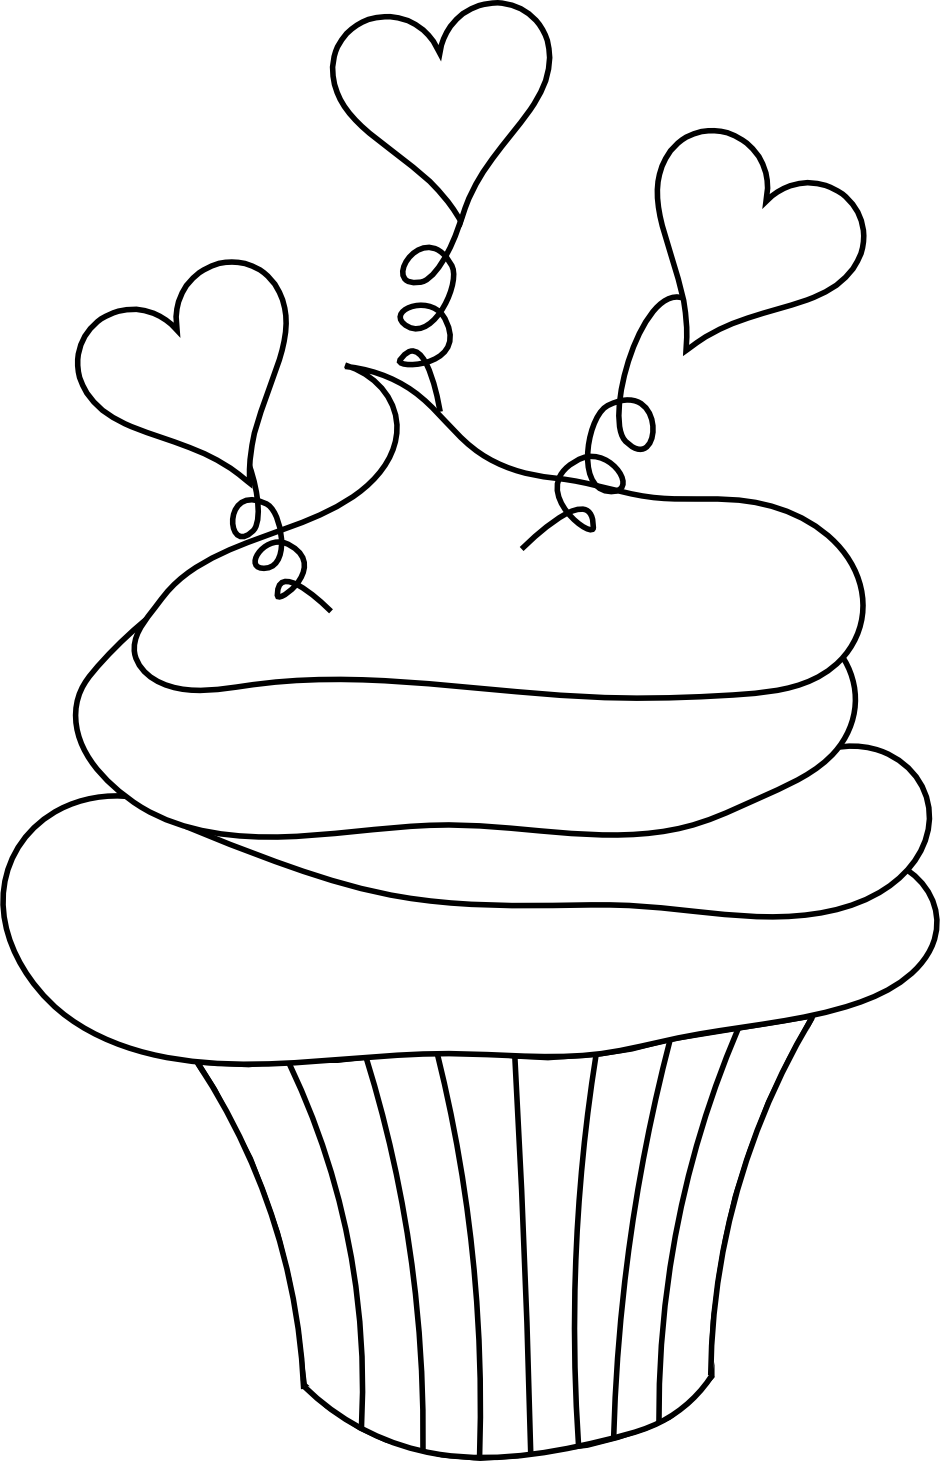 Cupcake clipart coloring page